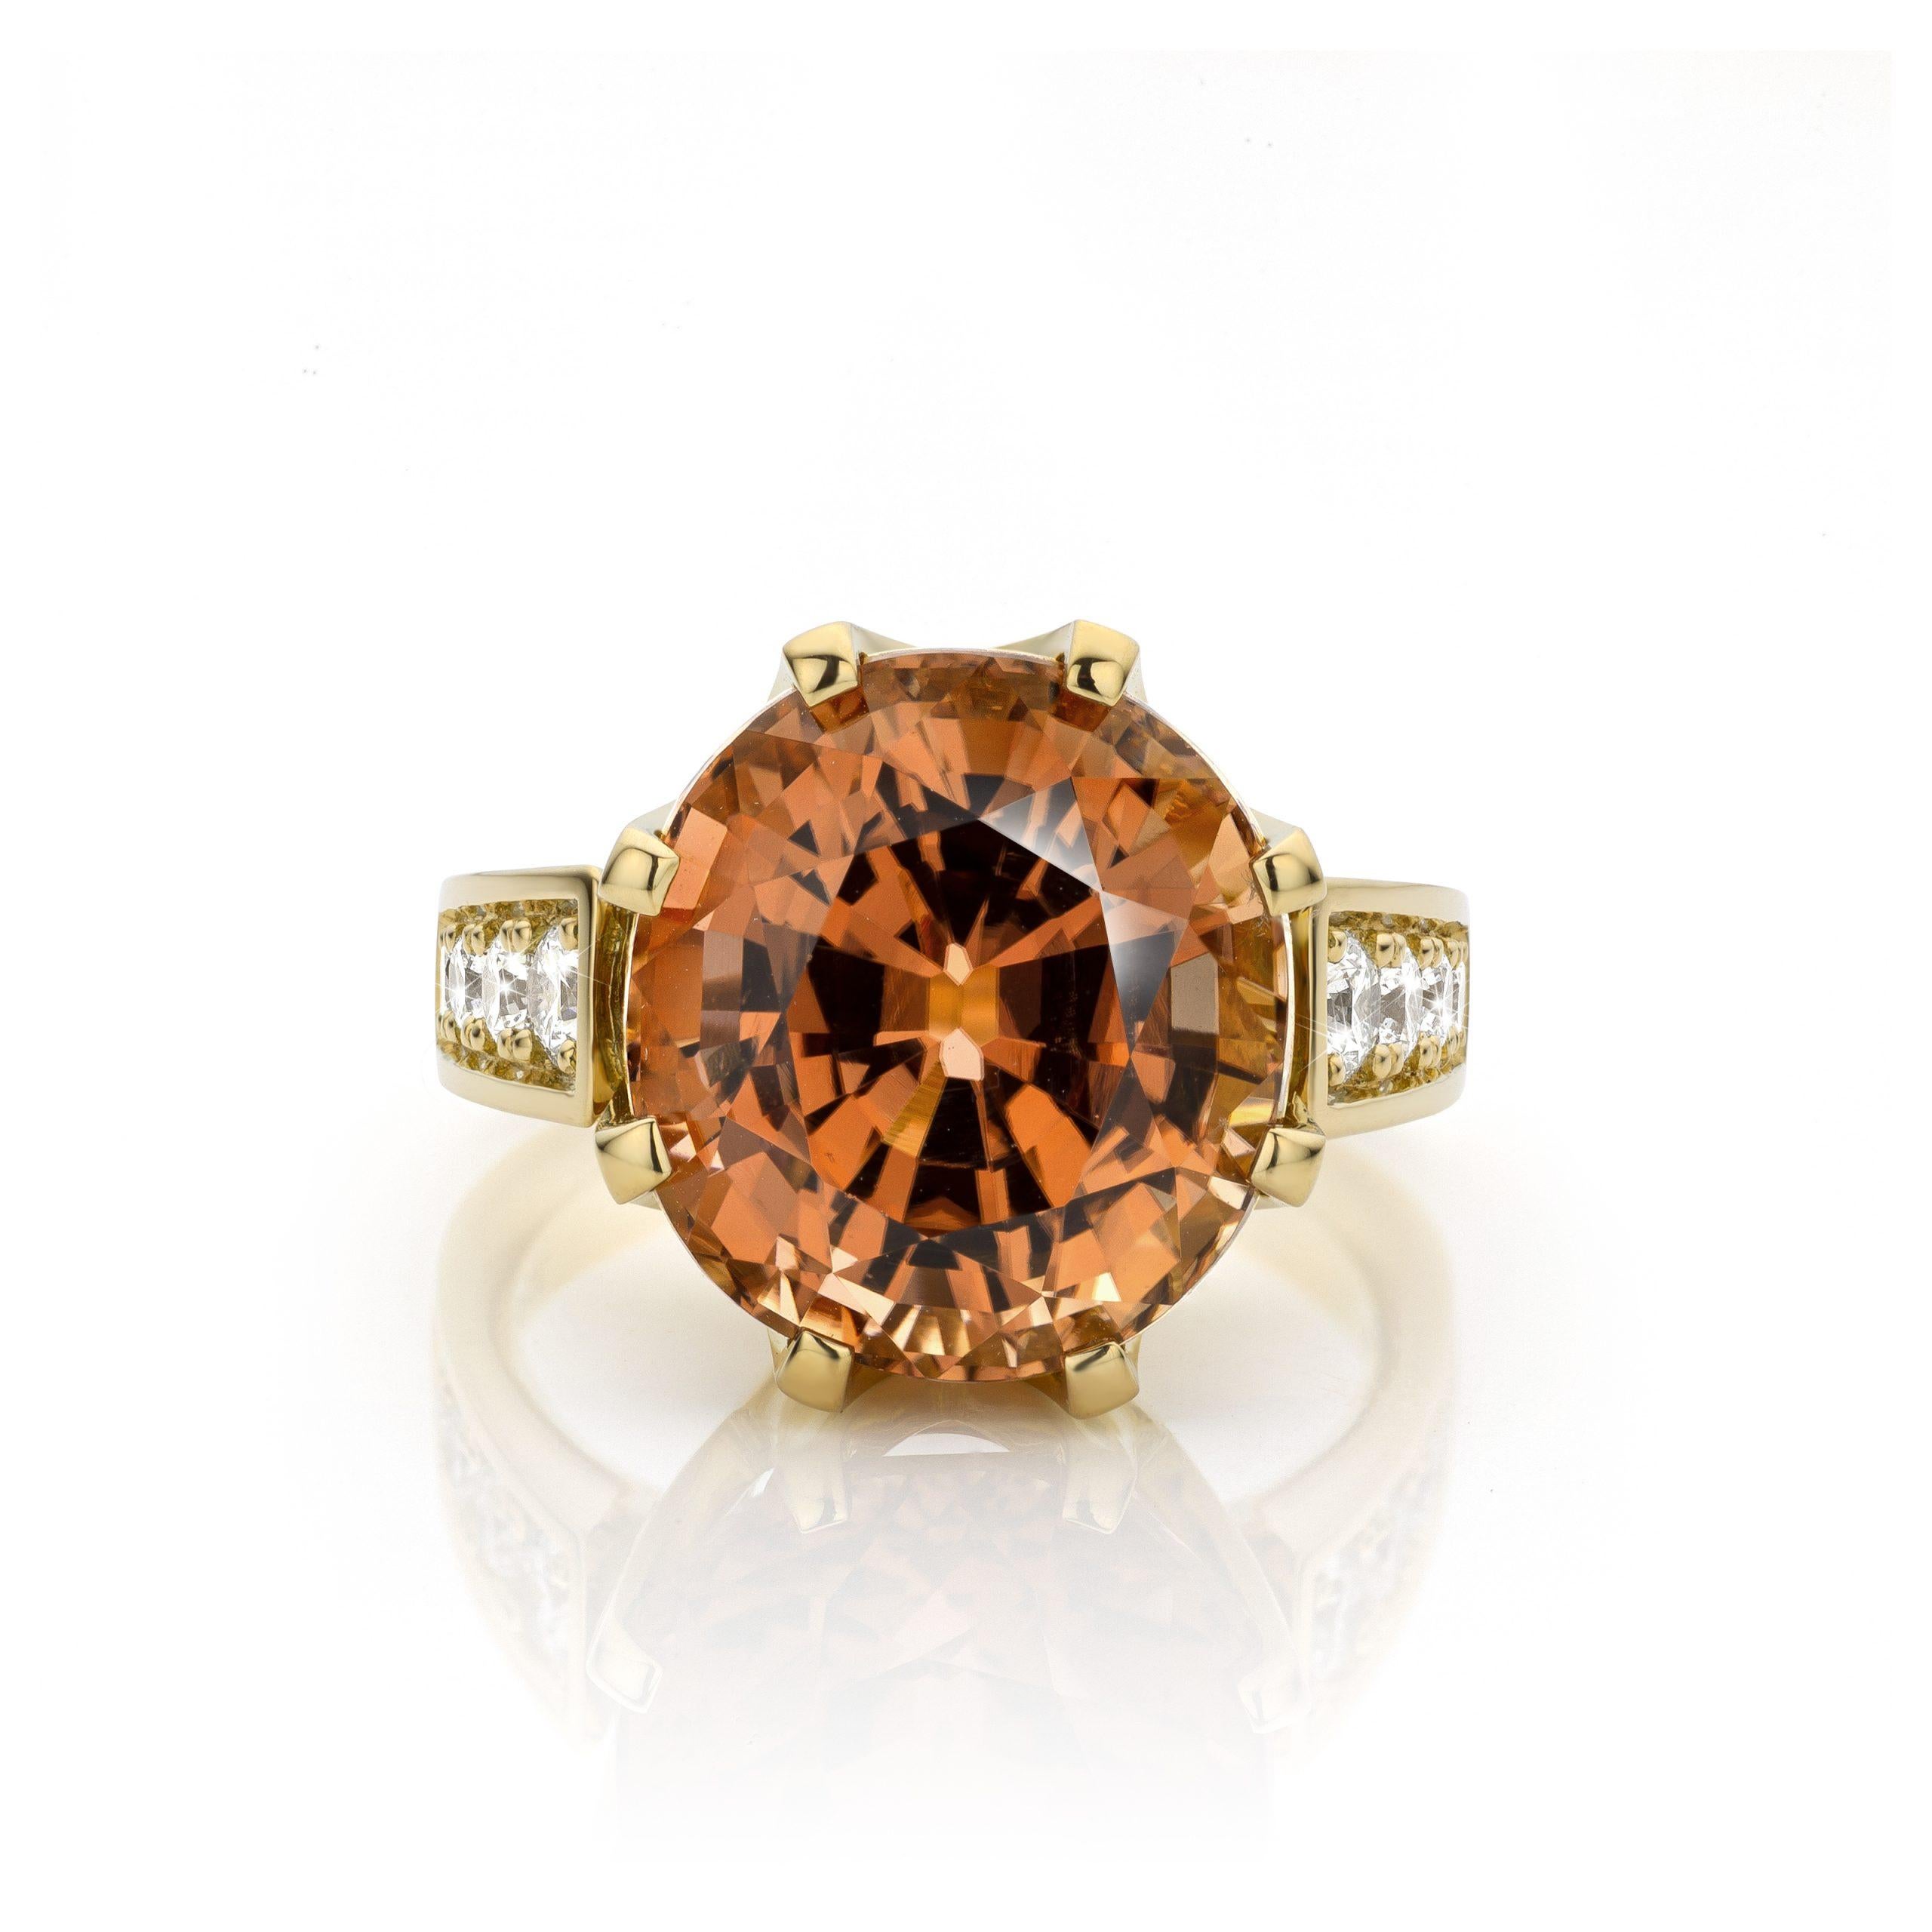 Queen Peach Ring with peach color Tourmaline and Diamonds  Cober Jewellery

Welcome to the world of exquisite jewellery! If you are a true jewellery enthusiast, then you have come to the right place. Today, we present to you the stunning Queen Peach